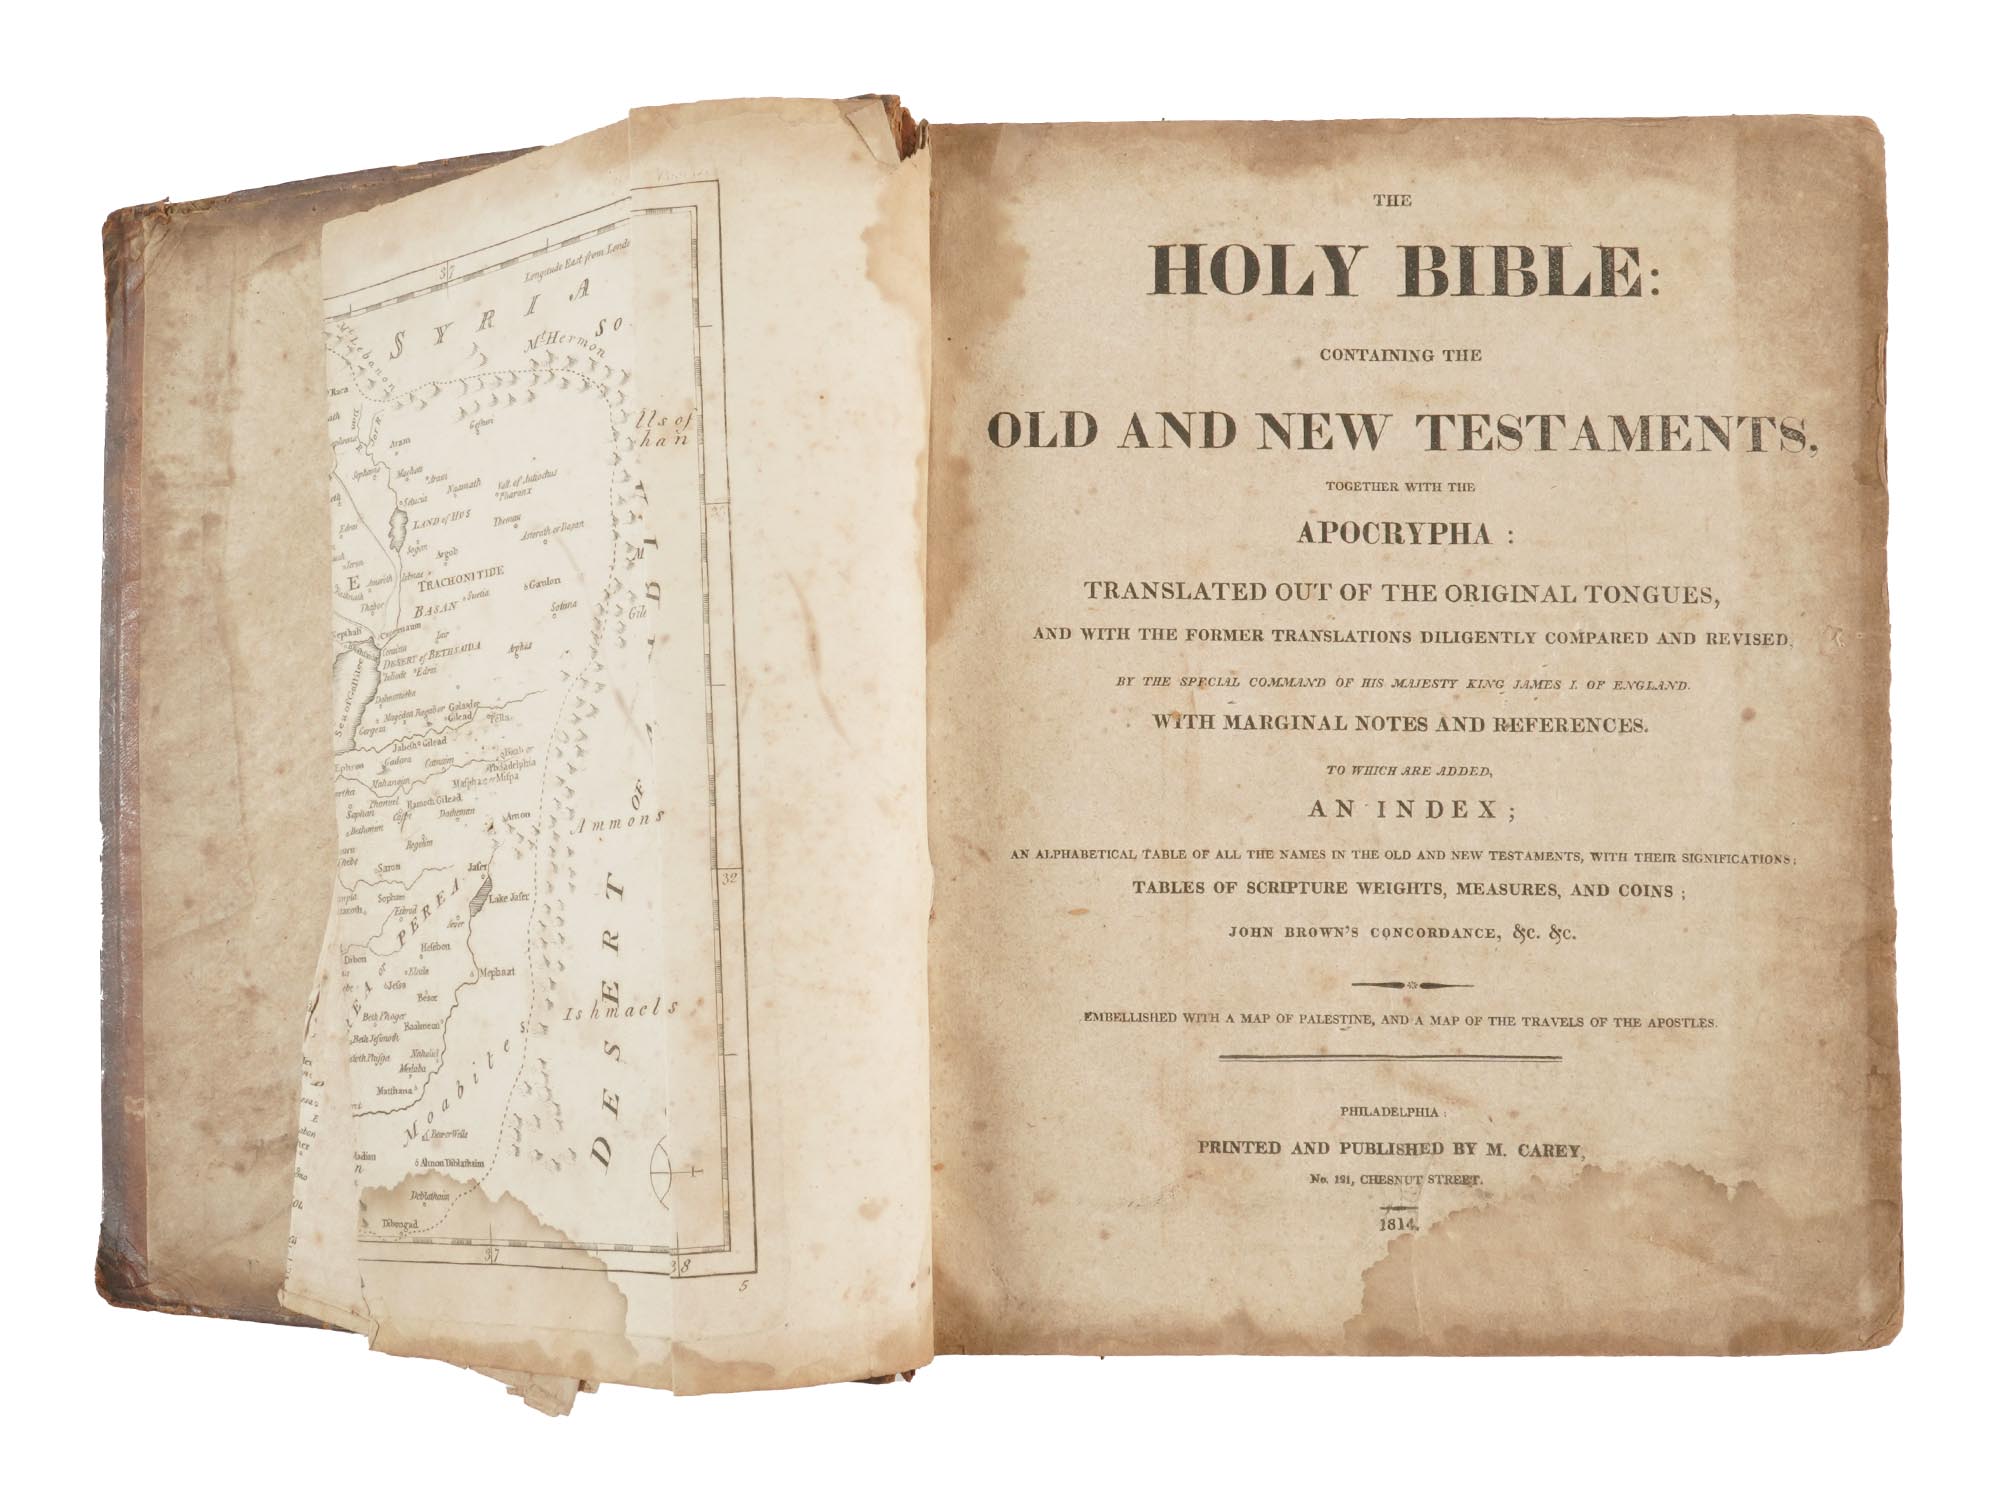 ANTIQUE 1814 HOLY BIBLE EDITION BY MATHEW CAREY PIC-6